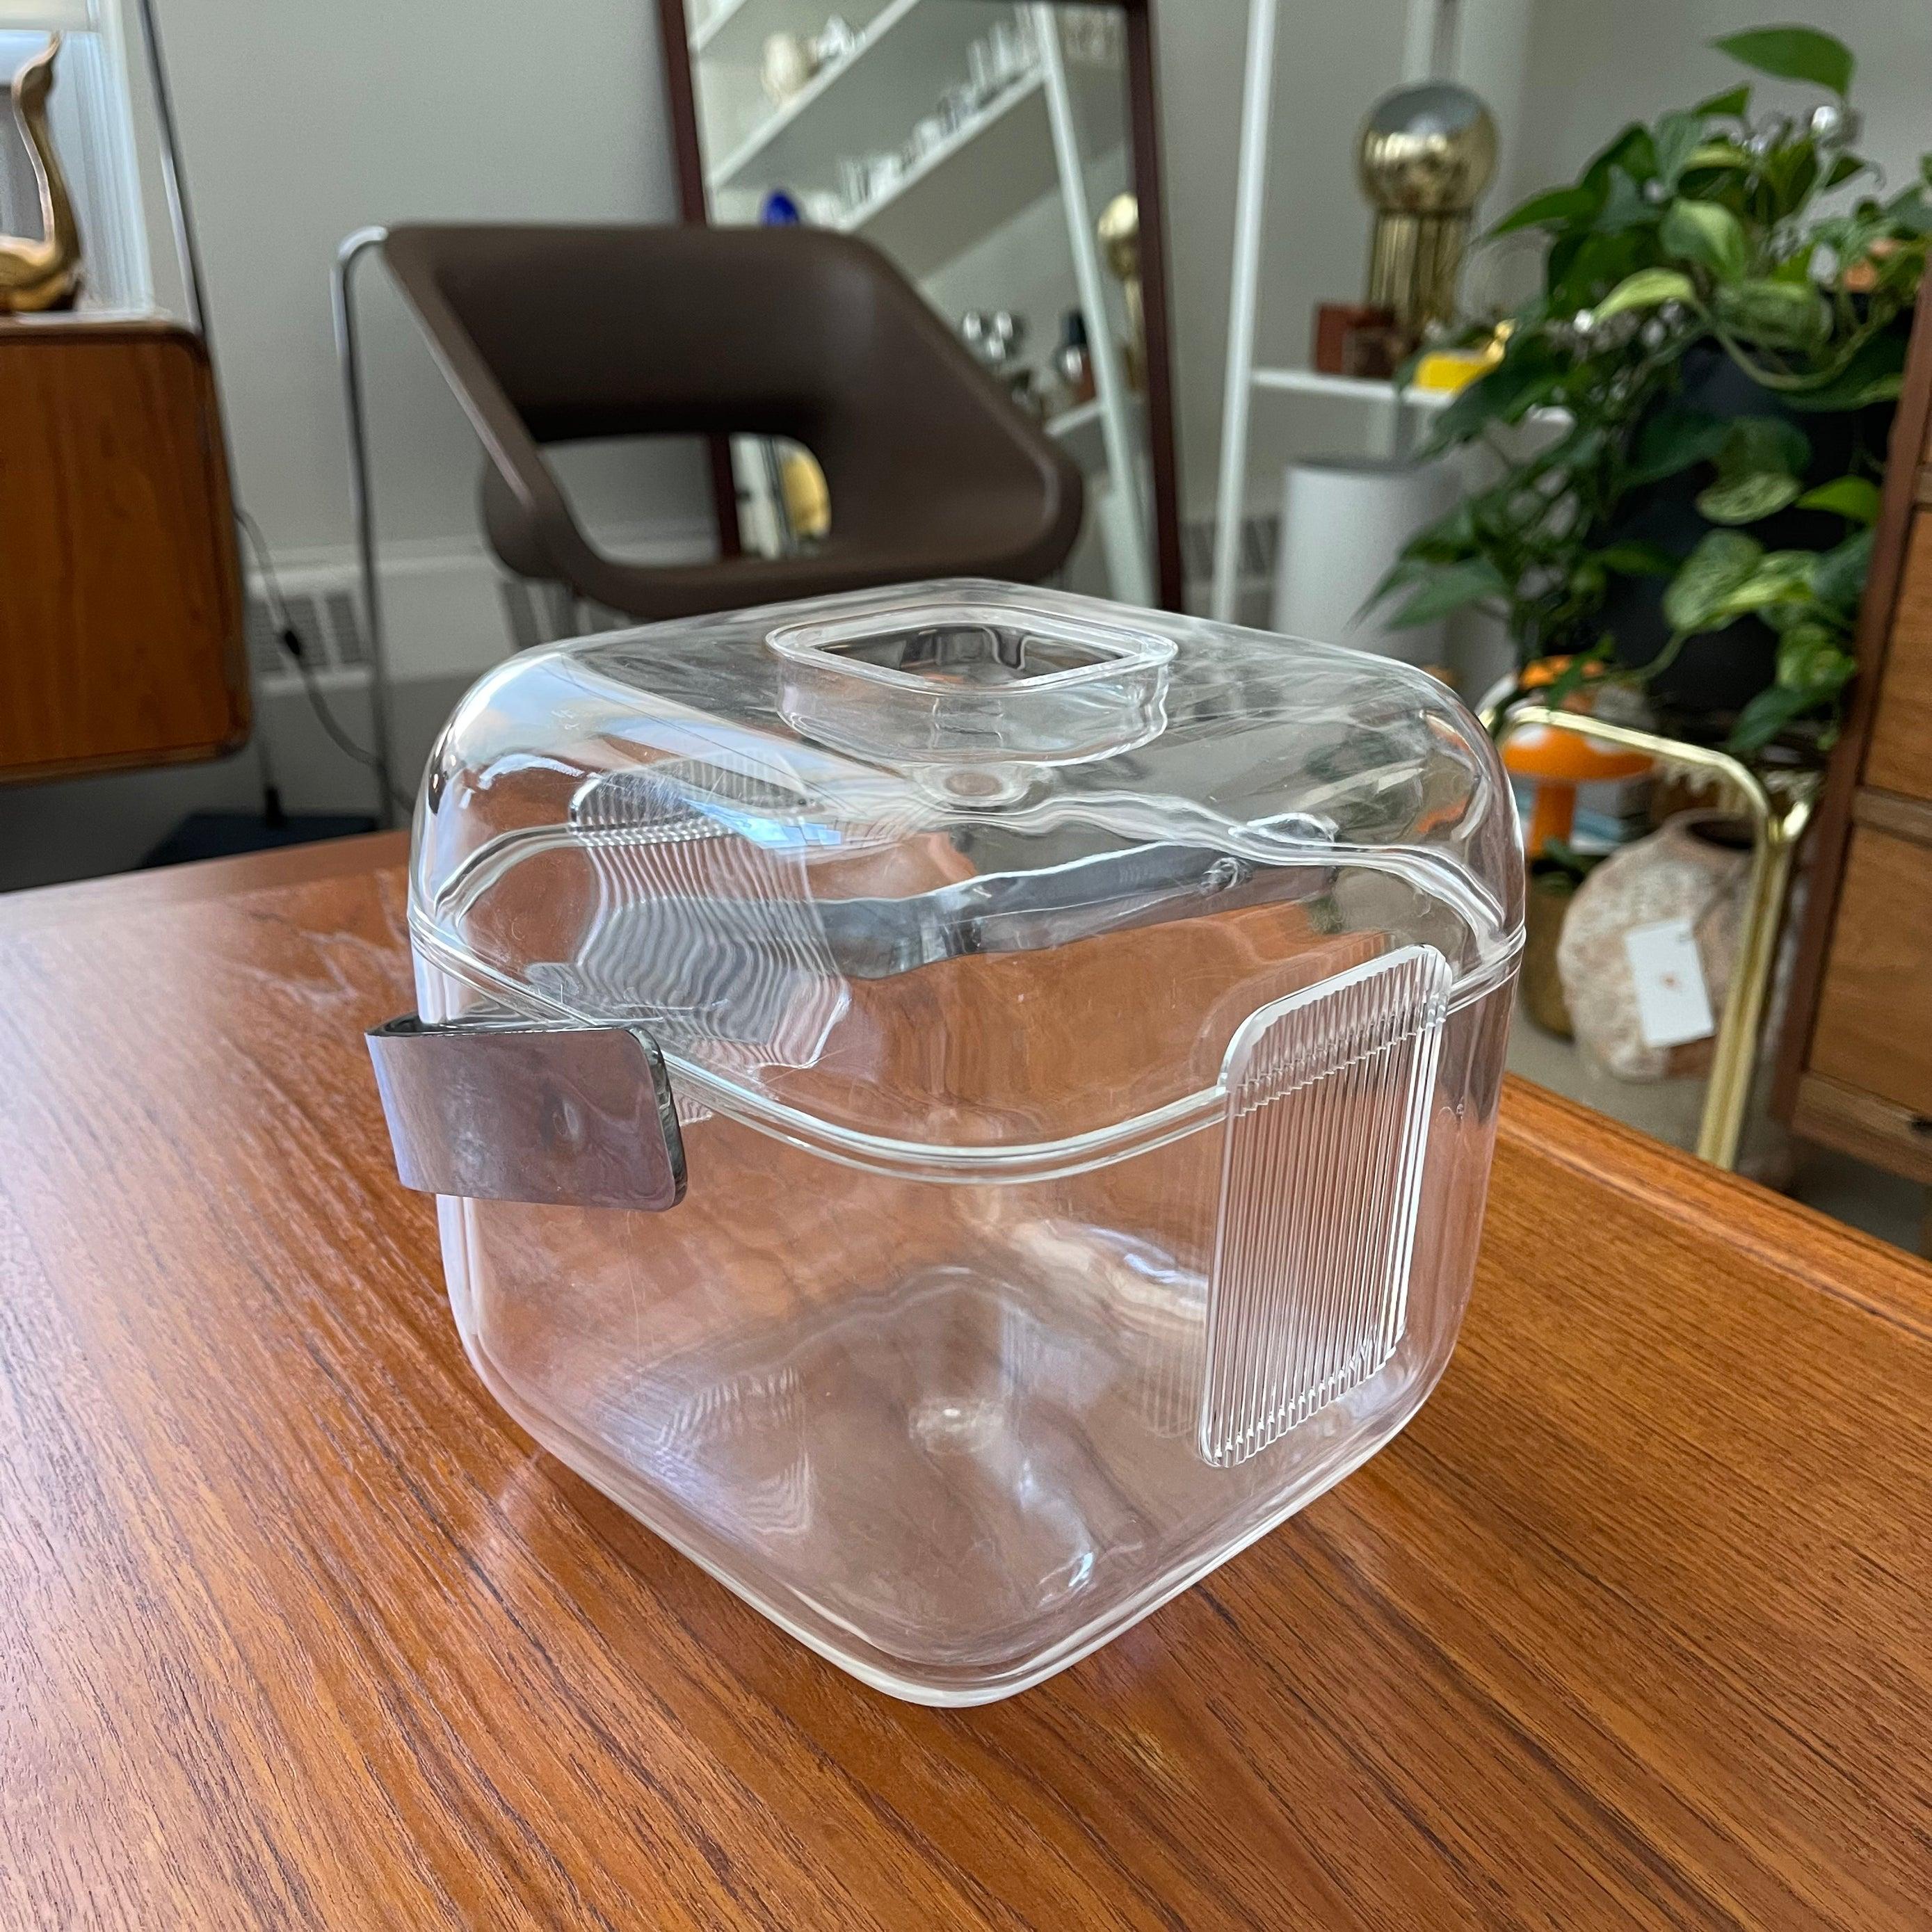 Mid-Century Modern Italian Lucite Ice Bucket by Guzzini In Good Condition For Sale In Edmonton, AB